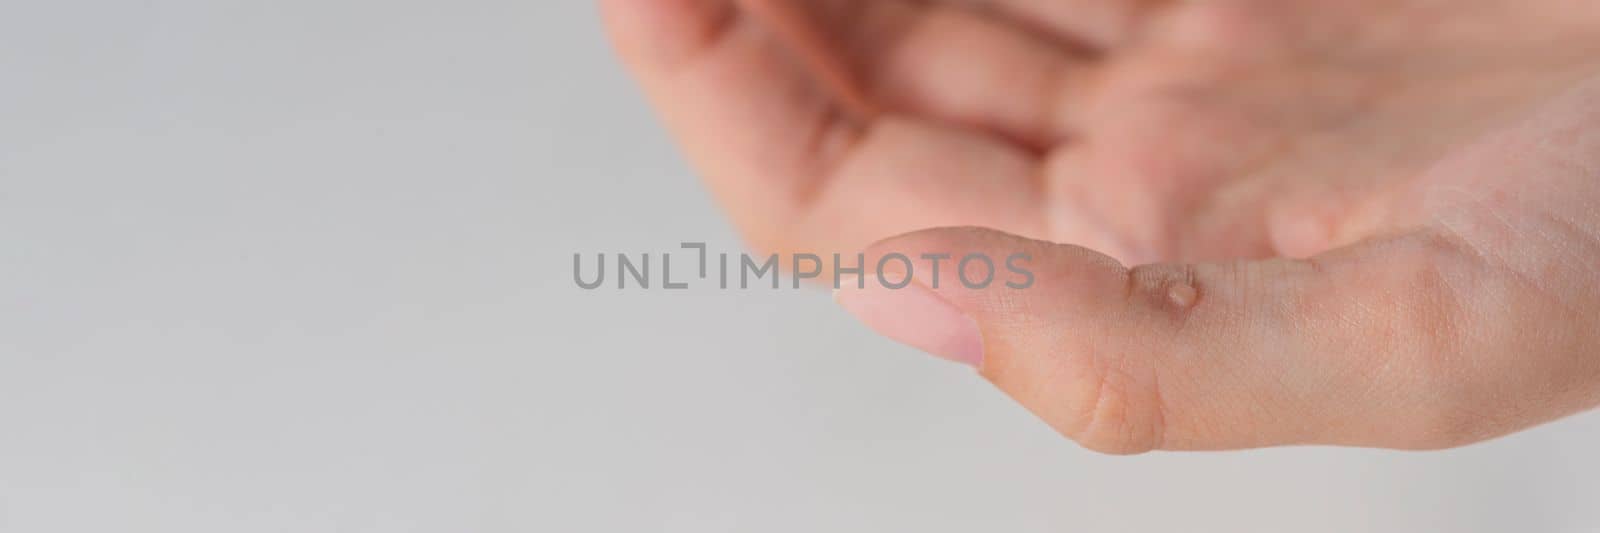 Wart on hand. The concept of treating warts and other skin defects. Close-up of a wart on a finger, a benign growth on human skin